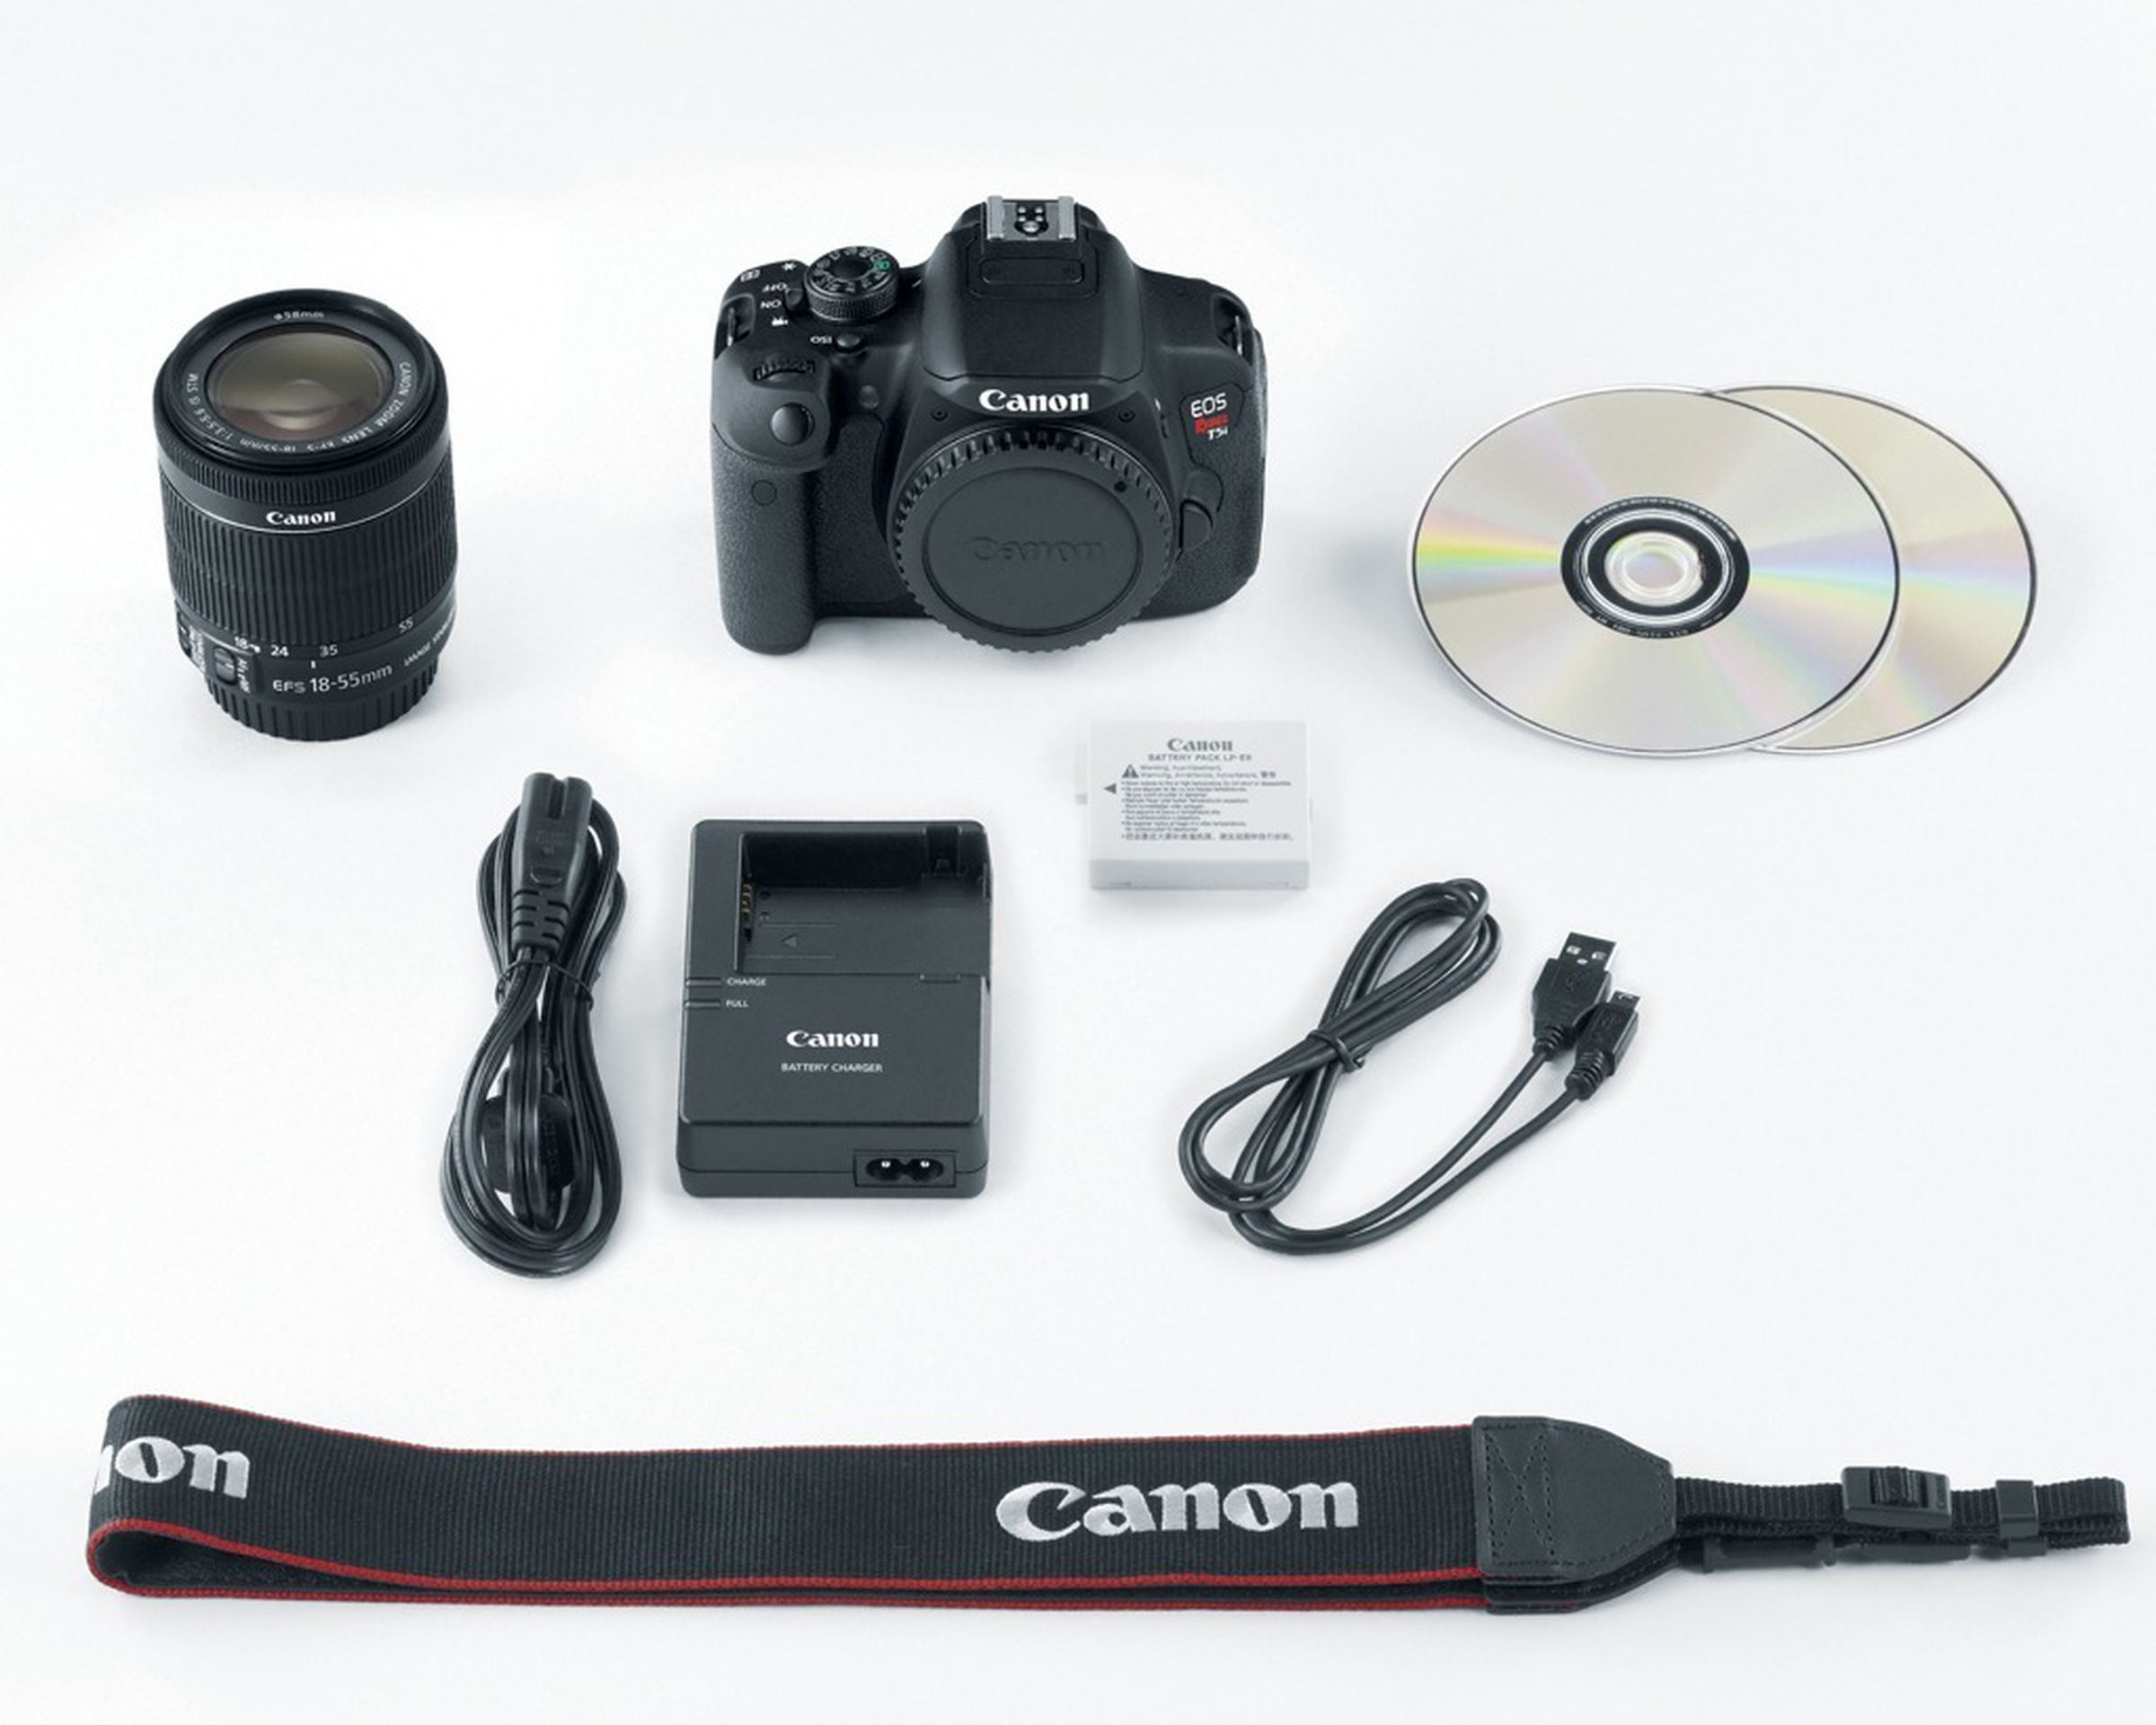 Canon EOS Rebel SL1, Rebel T5i, and PowerShot SX280 HS pictures